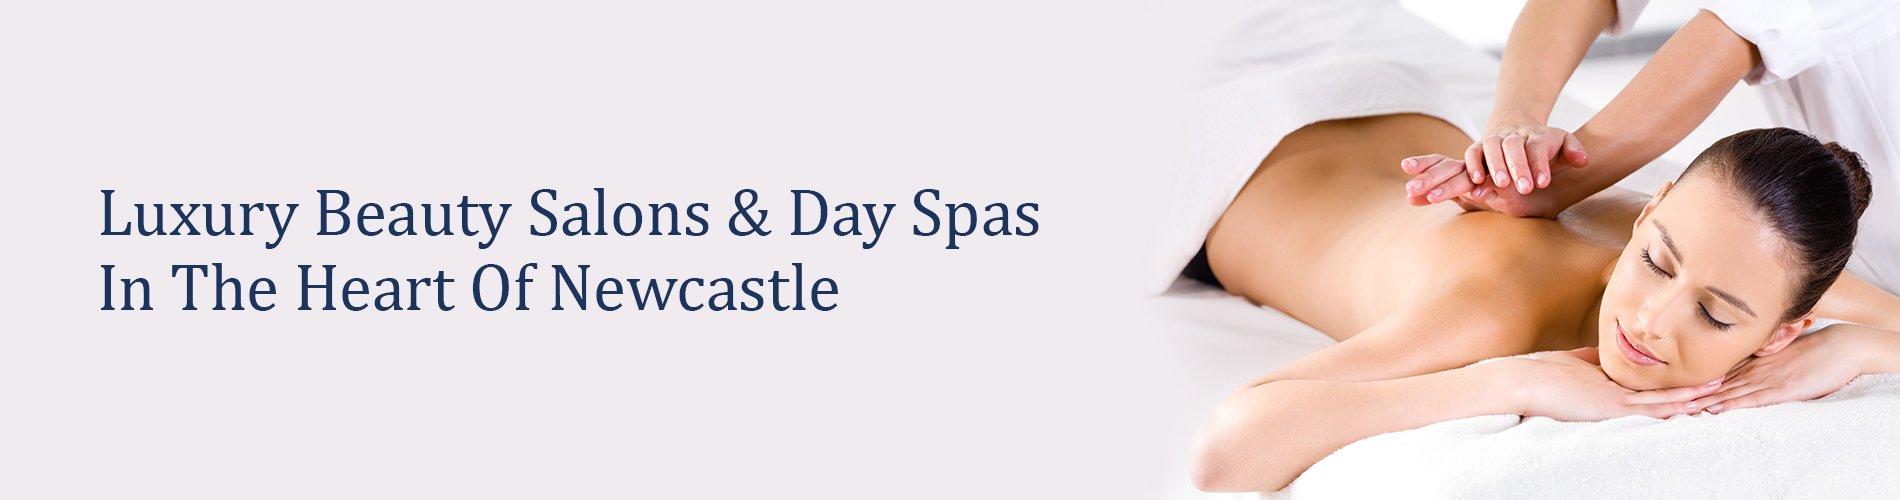 Luxury Beauty Salons Day Spas In The Heart Of Newcastle banner